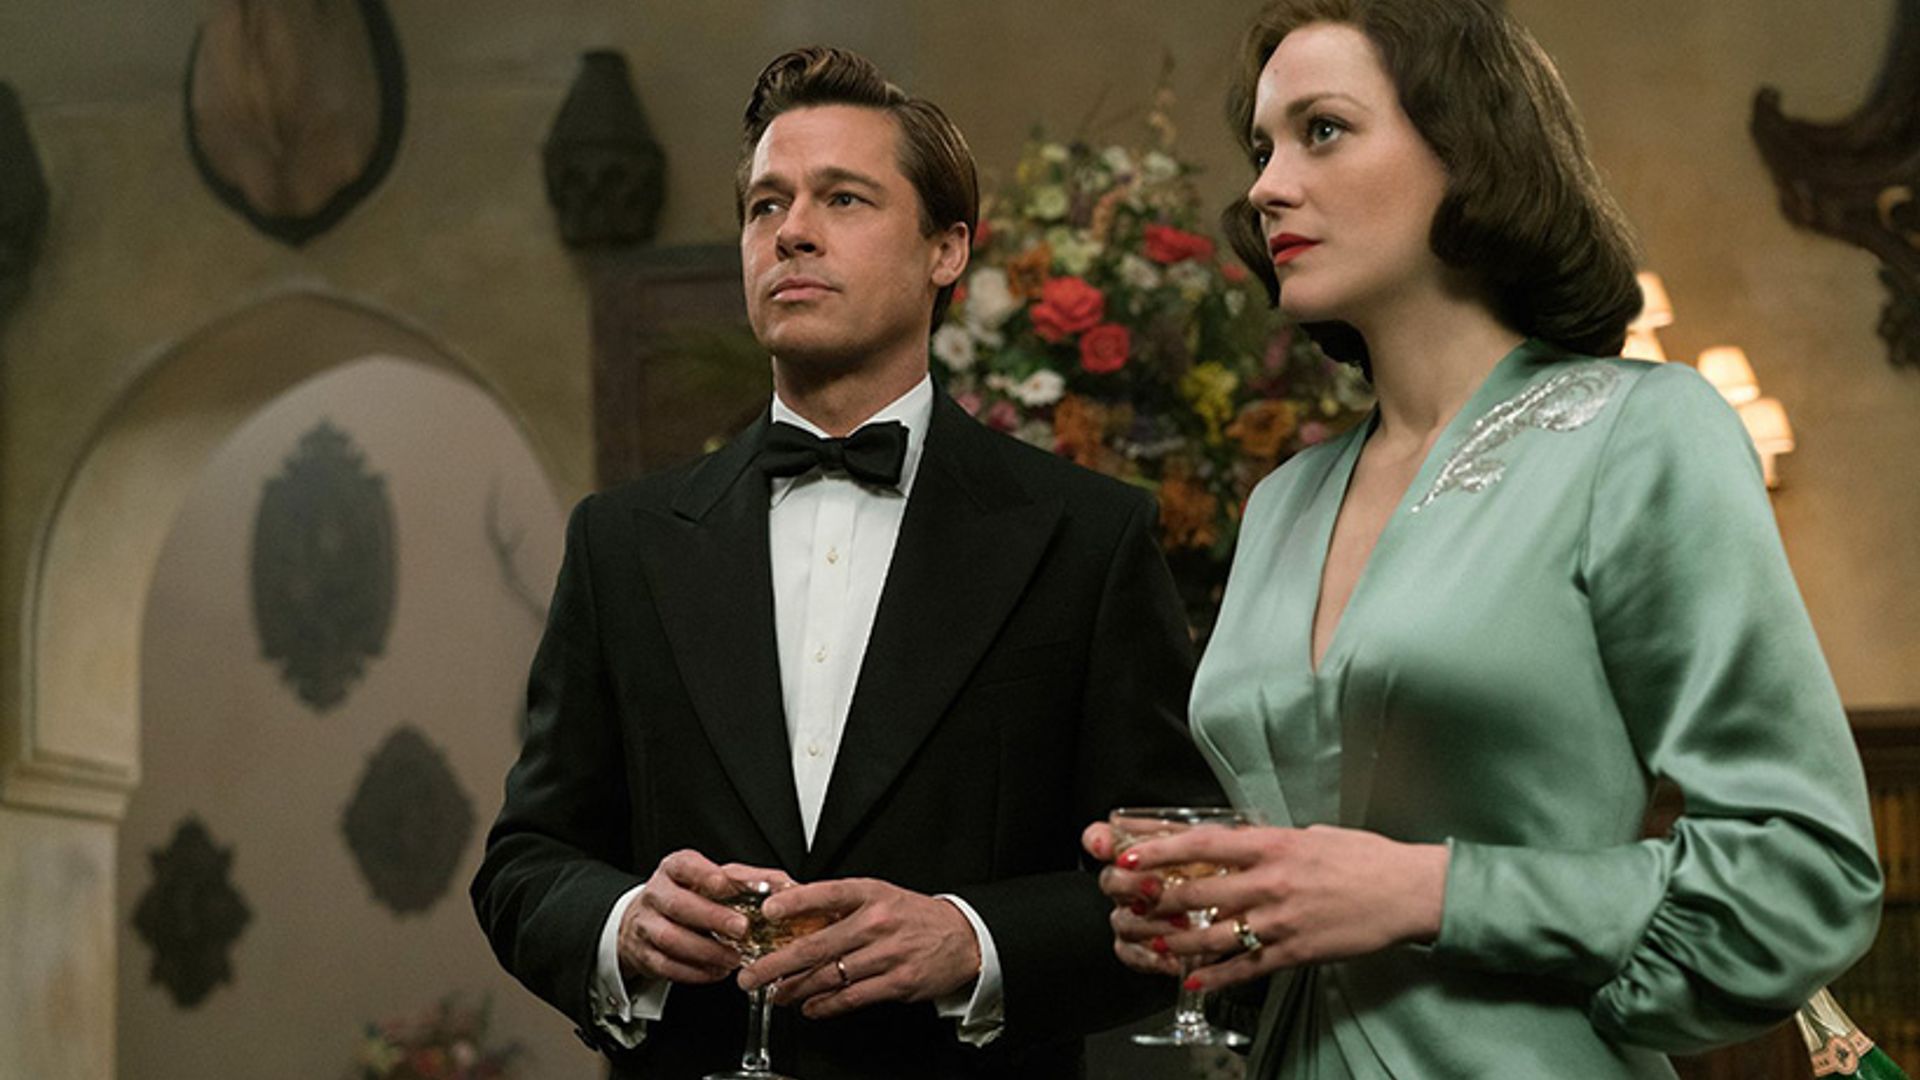 See Brad Pitt and Marion Cotillard's steamy new Allied trailer